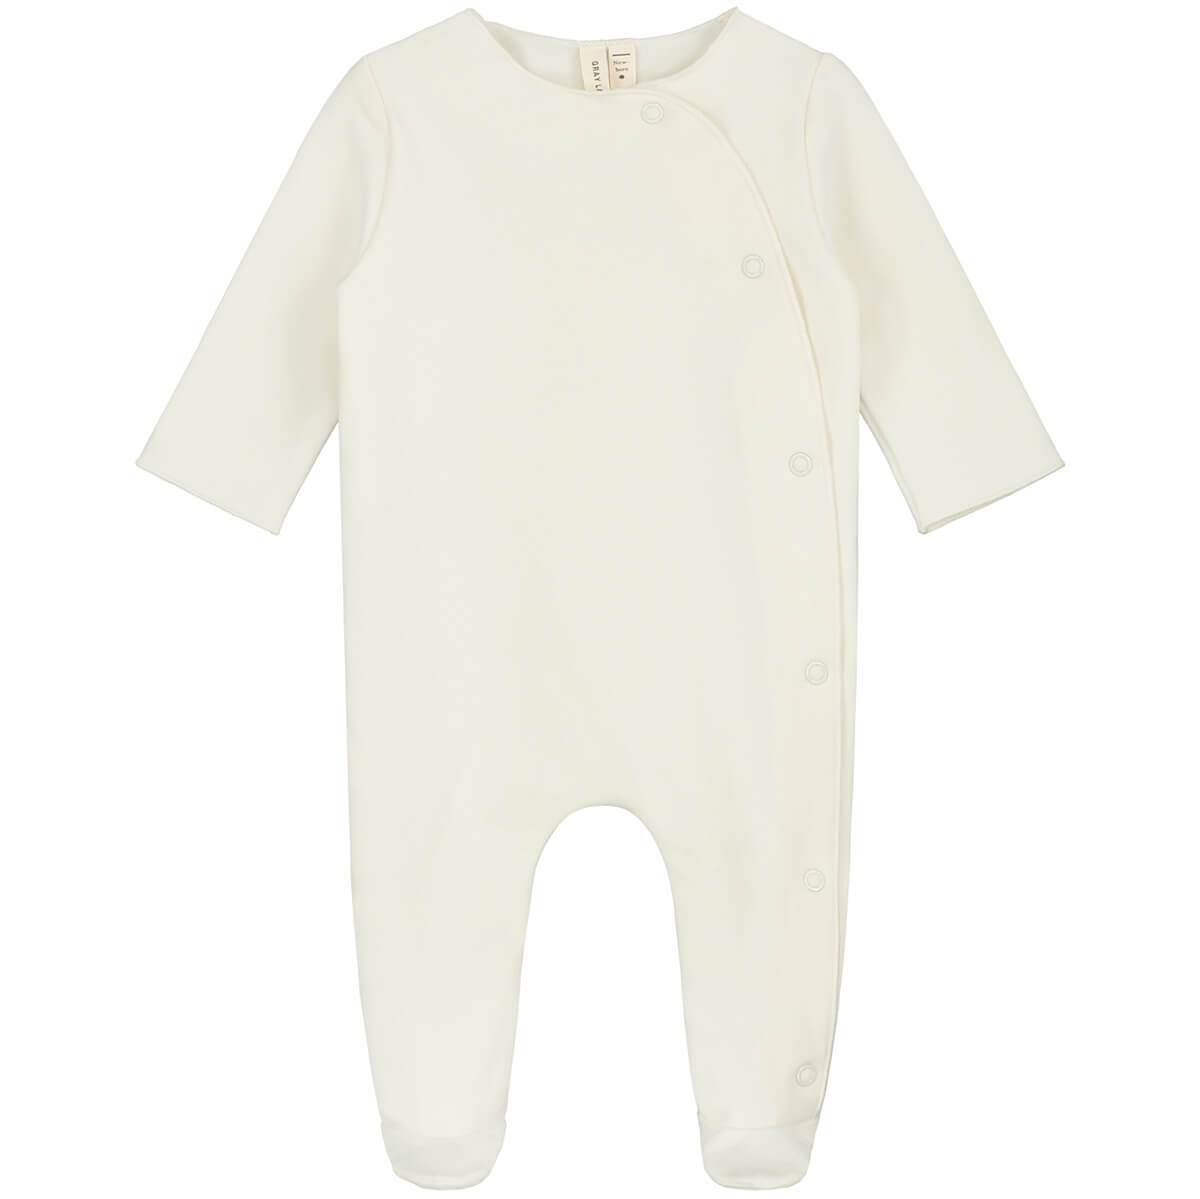 Newborn Suit With Snaps in Cream by Gray Label – Junior Edition